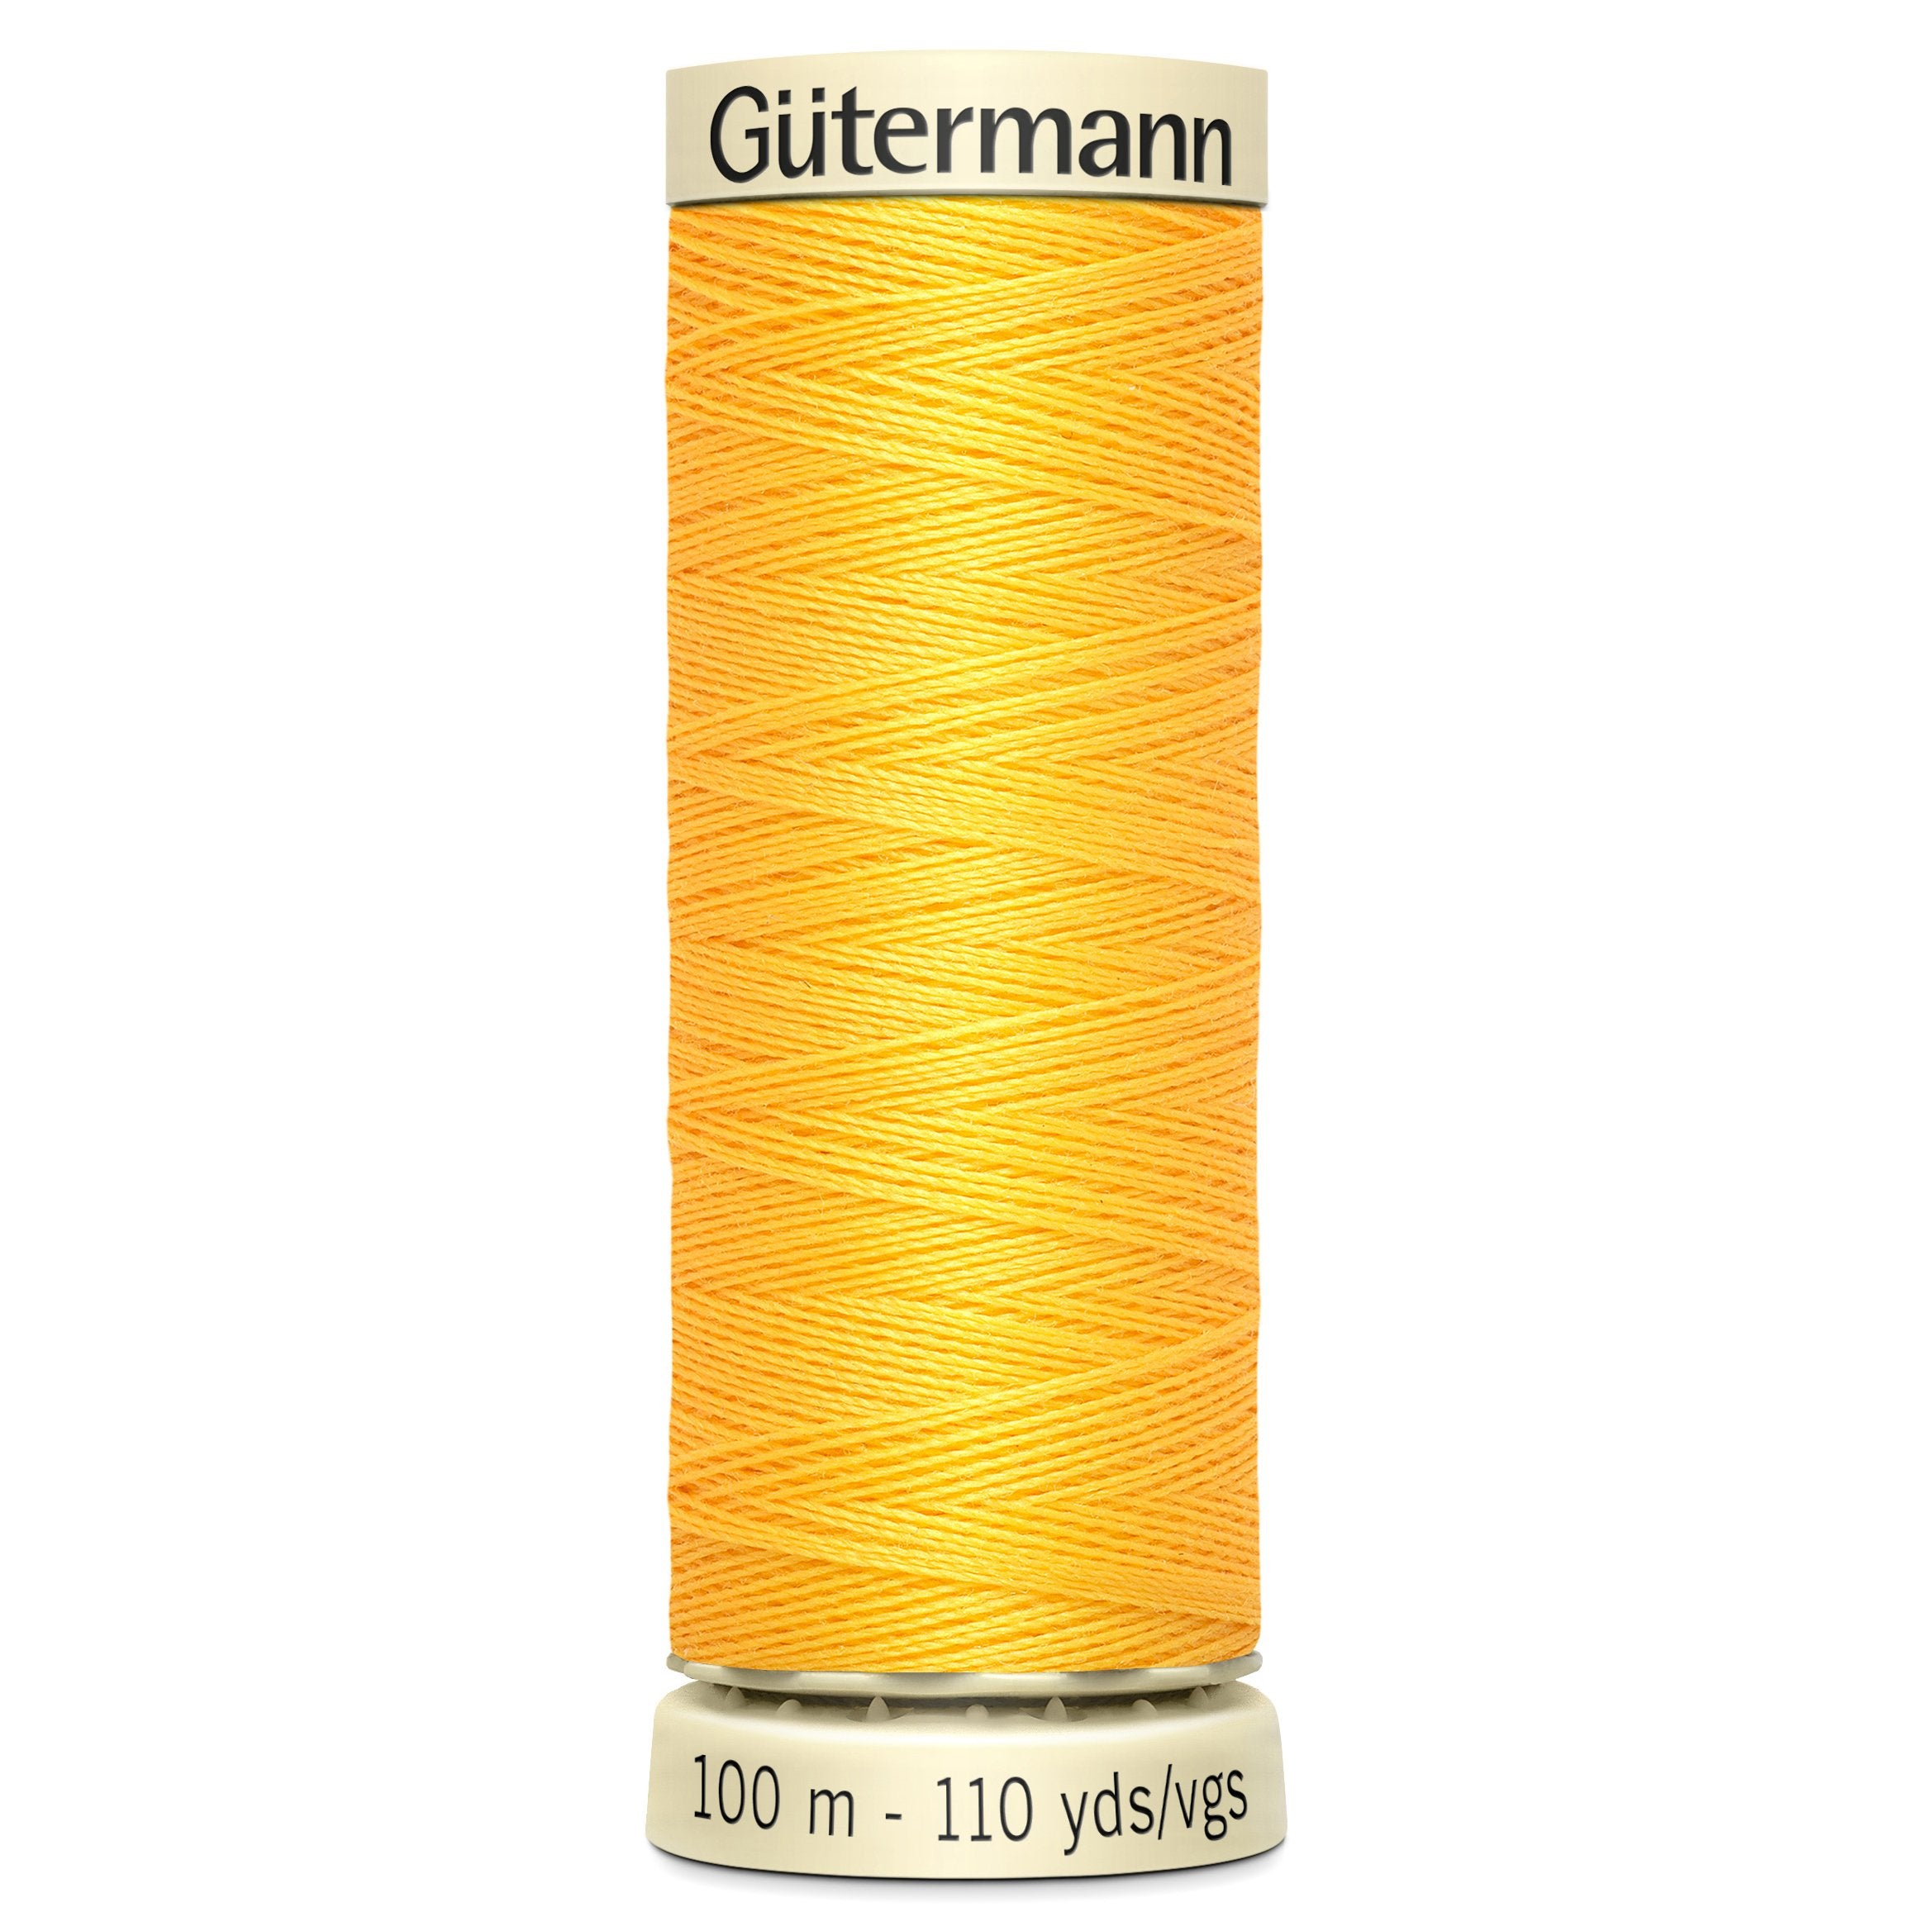 Gutermann Sew All Thread colour 417 Yellow from Jaycotts Sewing Supplies